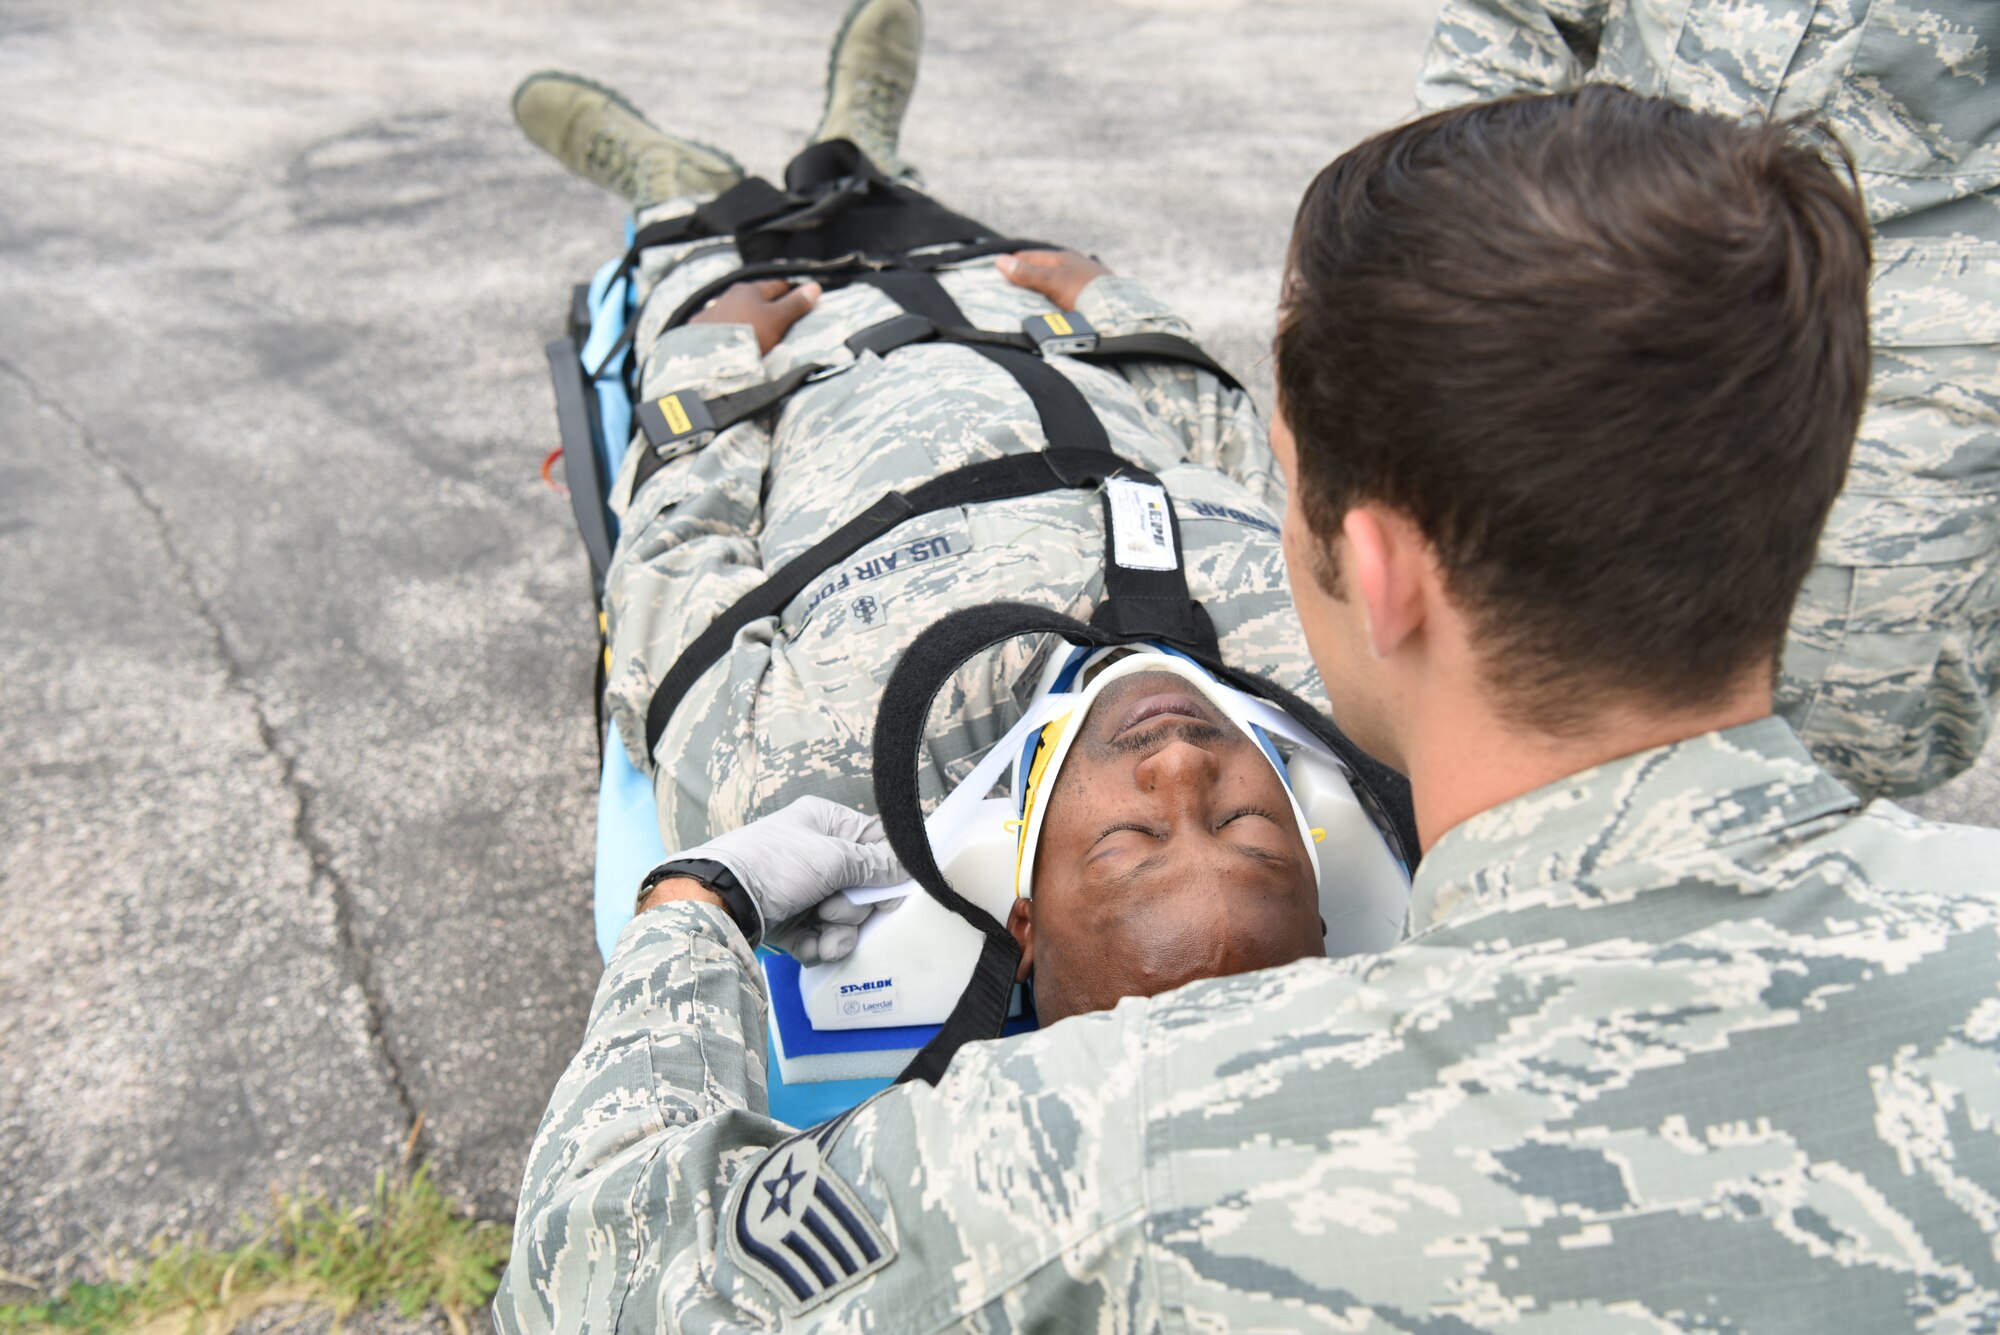 Staff Sgt. Michael Glowth, a 28th Medical Group aerospace medical technician, practices placing head blockers on Tech. Sgt. Ricky Dunbar, the noncommissioned officer in charge of the ambulance services flight at Ellsworth Air Force Base, S.D., July 10, 2018. Aerospace medical technicians go through a 98-day course that prepares them for the stresses and responsibilities of serving in ambulance services. (U.S. Air Force photo by Airman 1st Class Thomas Karol)